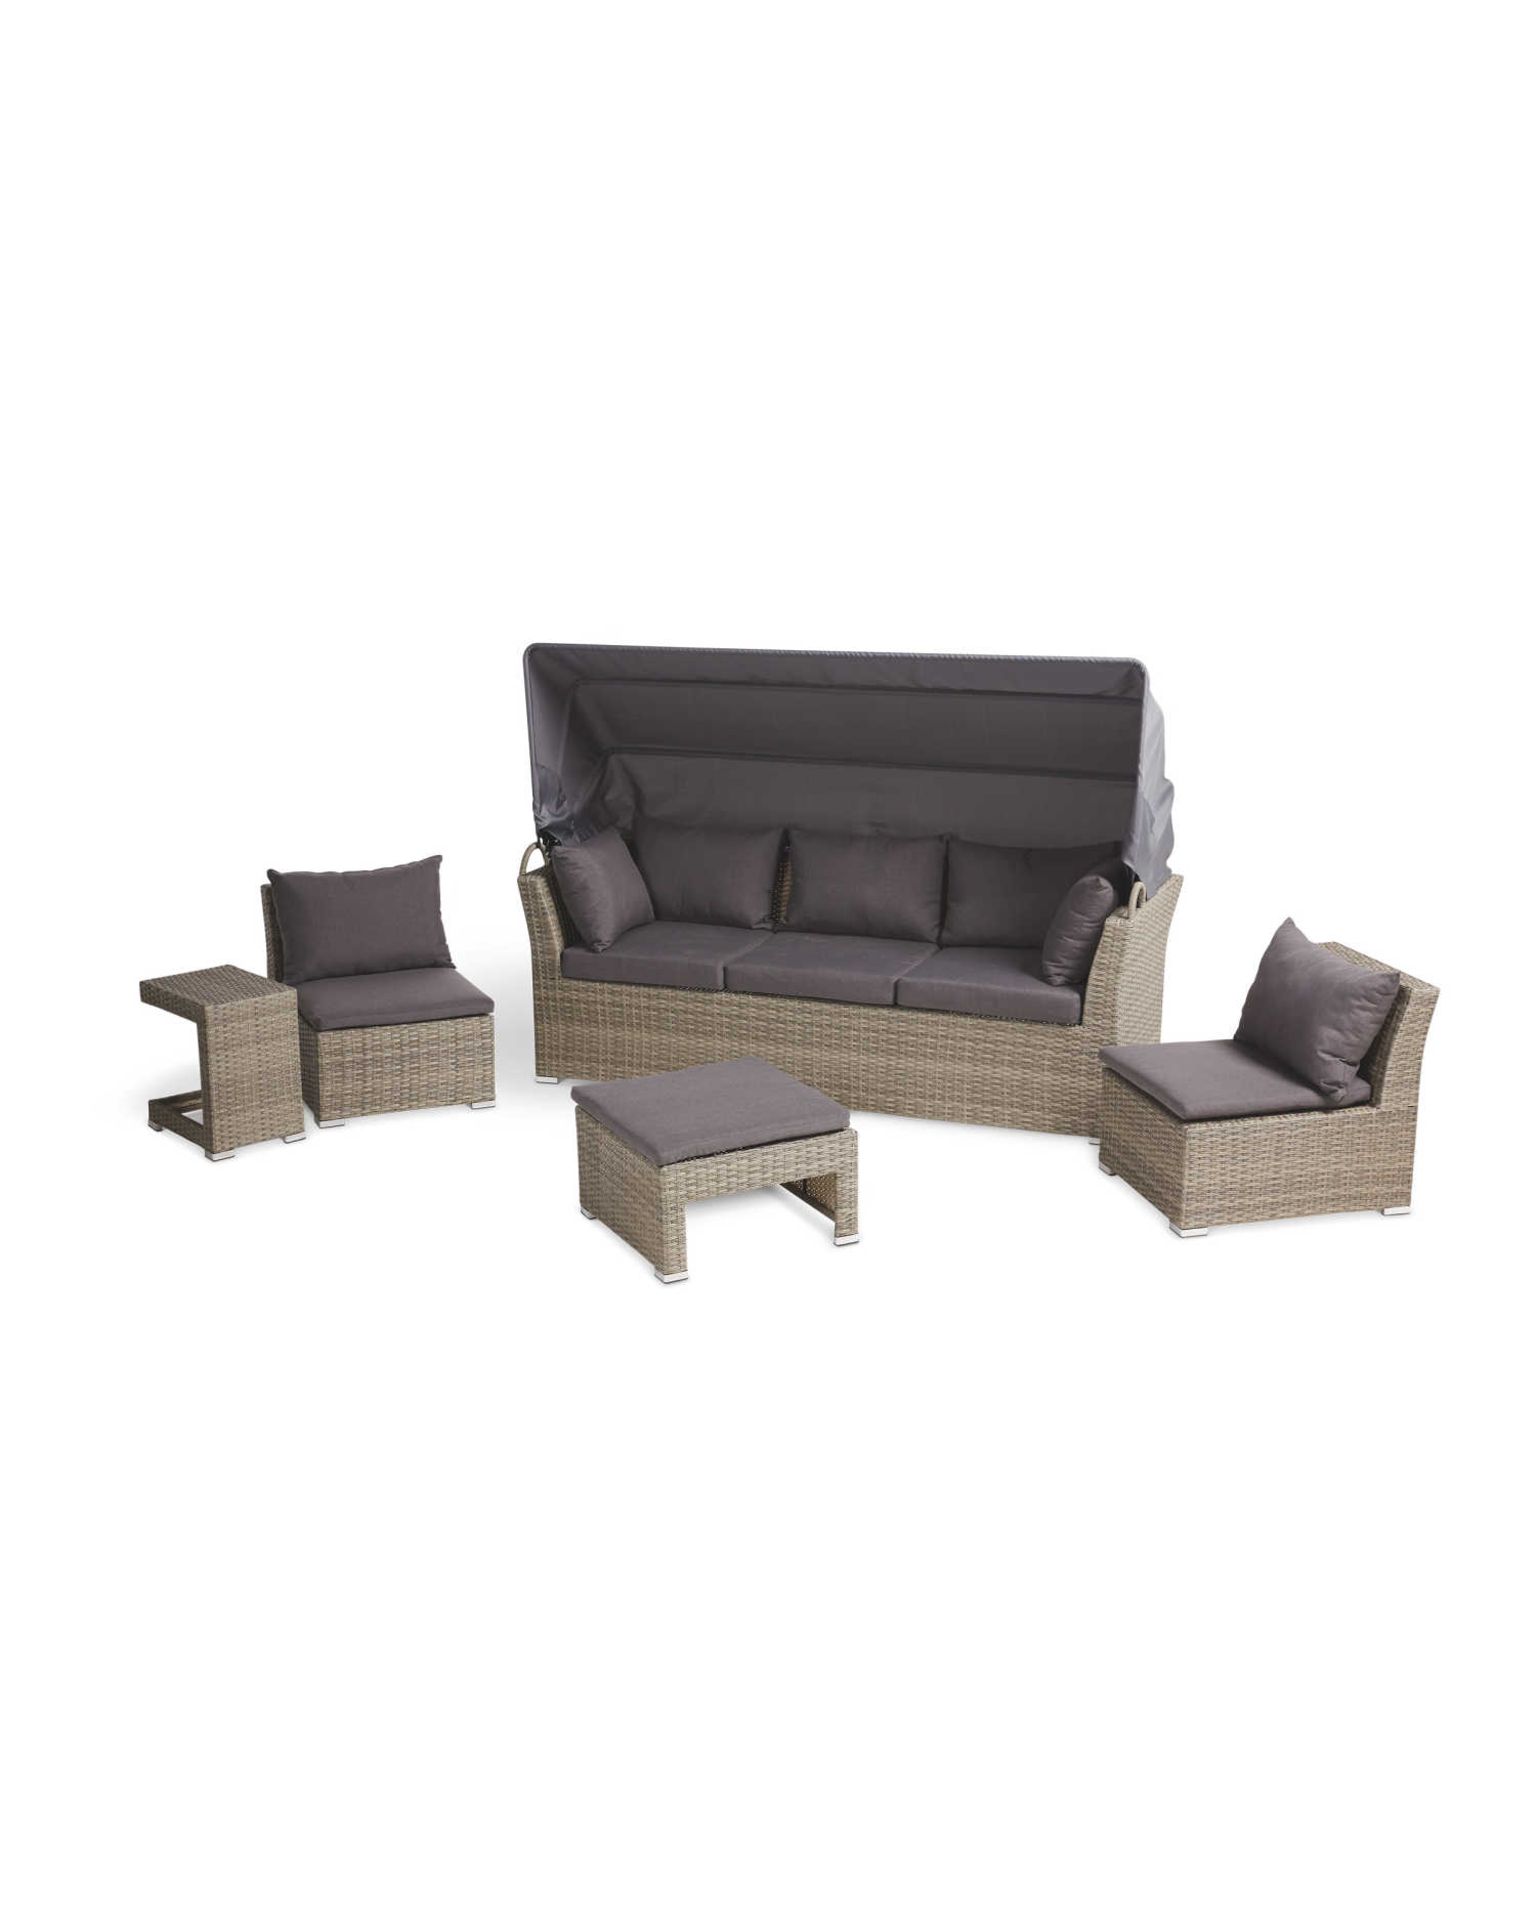 Rattan Effect Sofa Set with Canopy. - H/ST. Soak up the sun and feel that much needed summer - Image 2 of 3